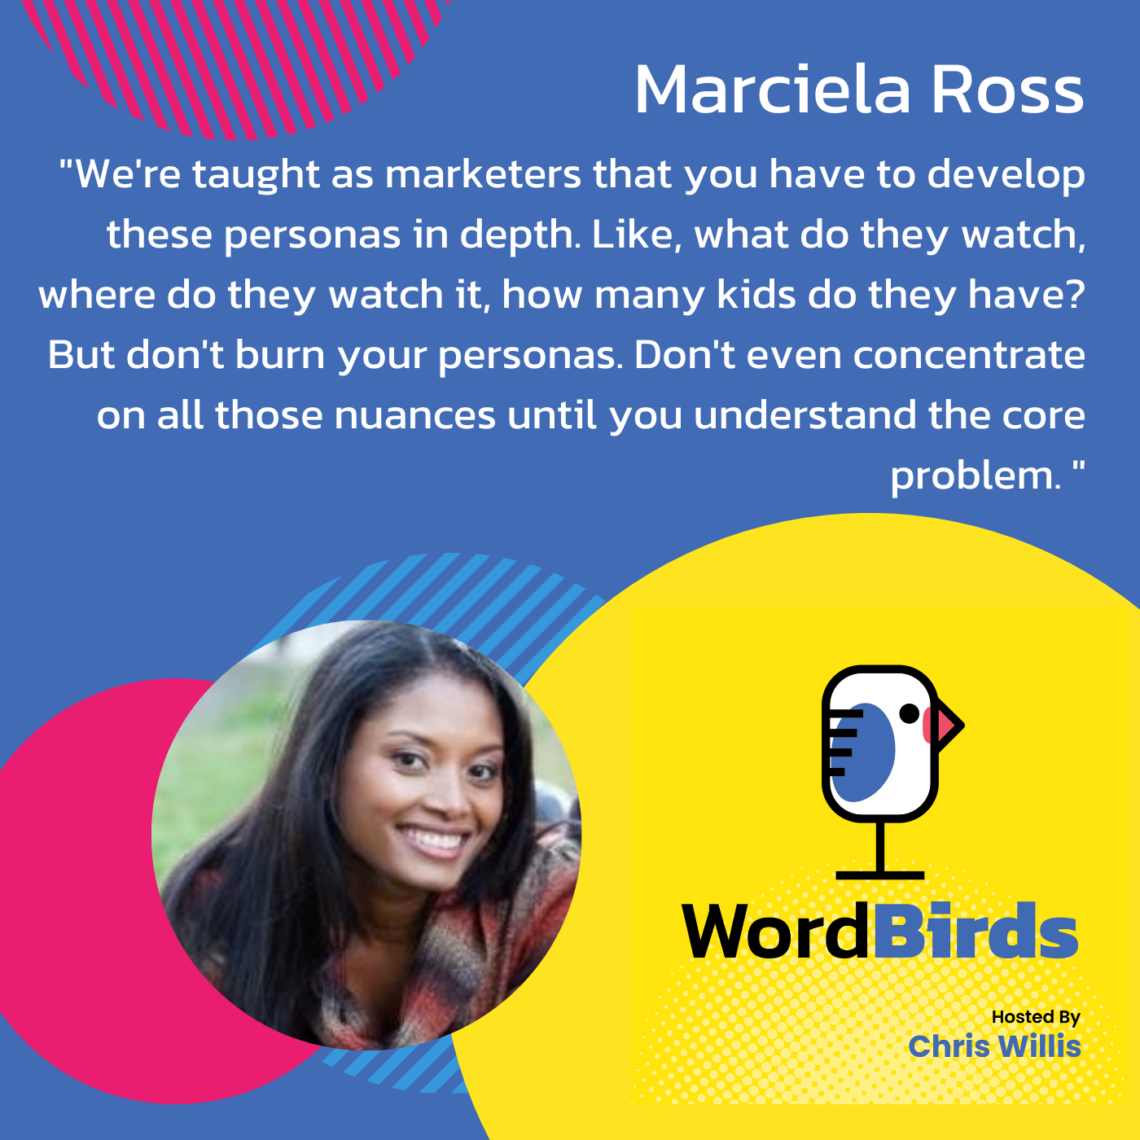 A quote from Marciela Ross is displayed on a blue background: ""We're taught as marketers that you have to develop these personas in depth. Like, what do they watch, where do they watch it, how many kids do they have? But don't burn your personas. Don't even concentrate on all those nuances until you understand the core problem." At the bottom of the image is a headshot of Marciela Ross and the WordBirds logo.